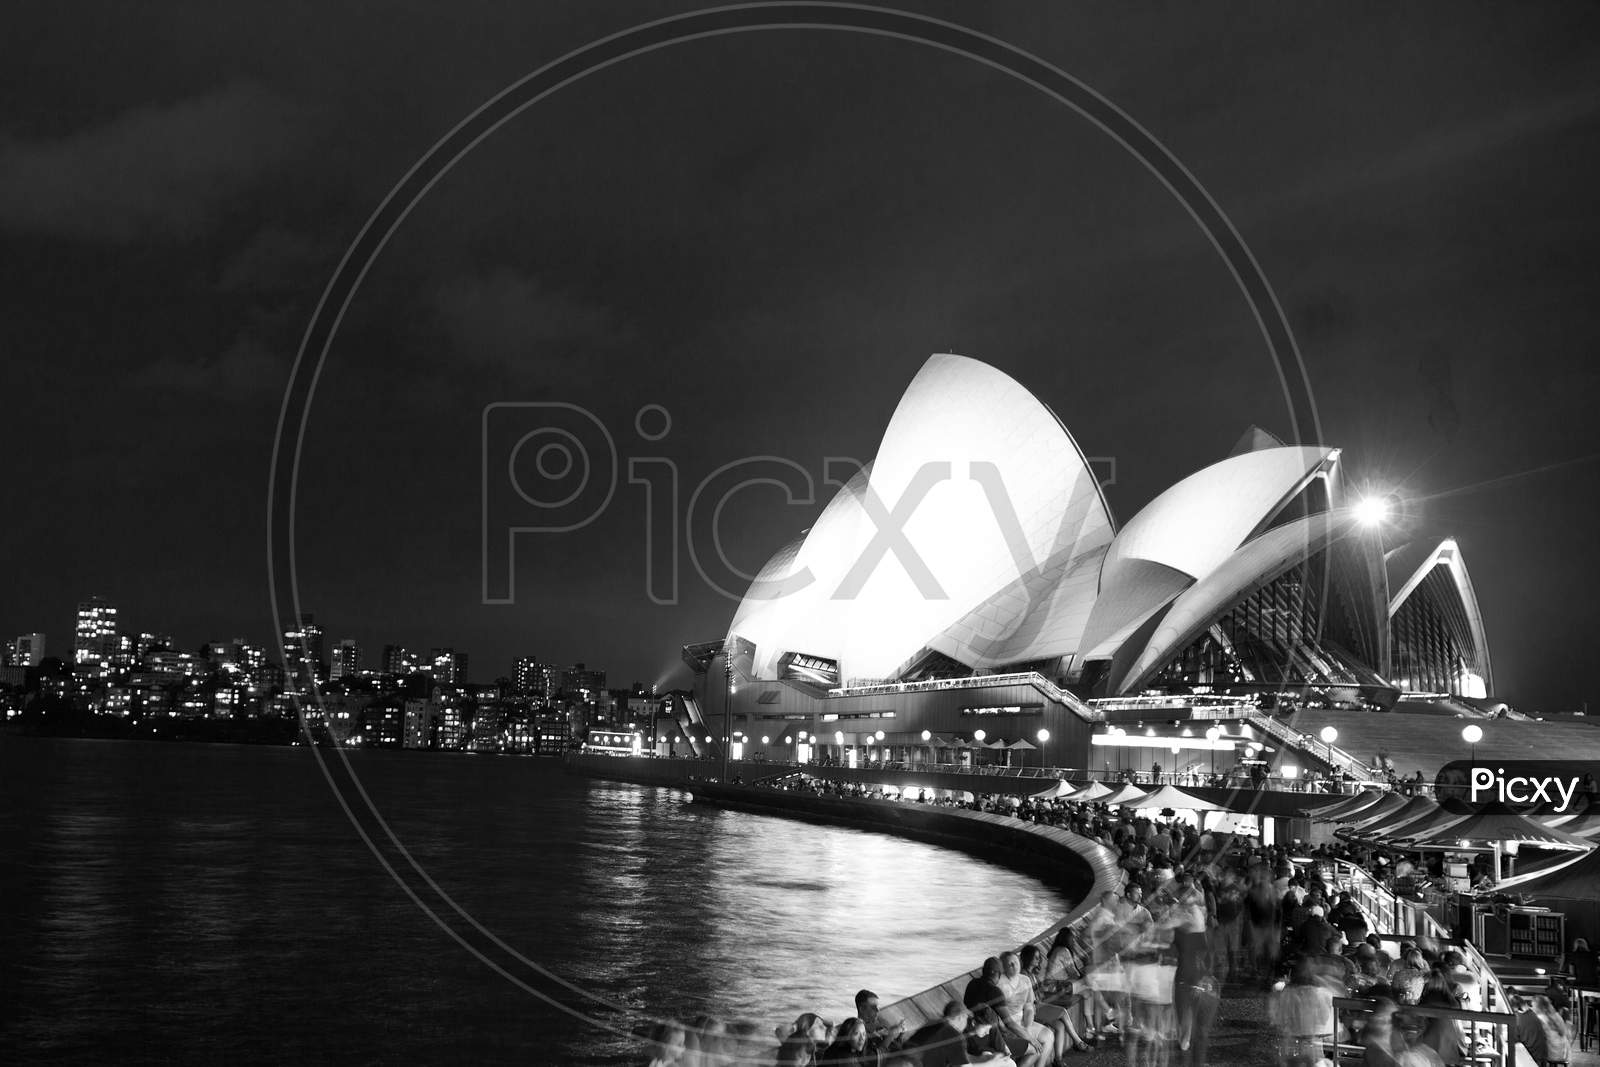 Sydney Opera House in Black and White